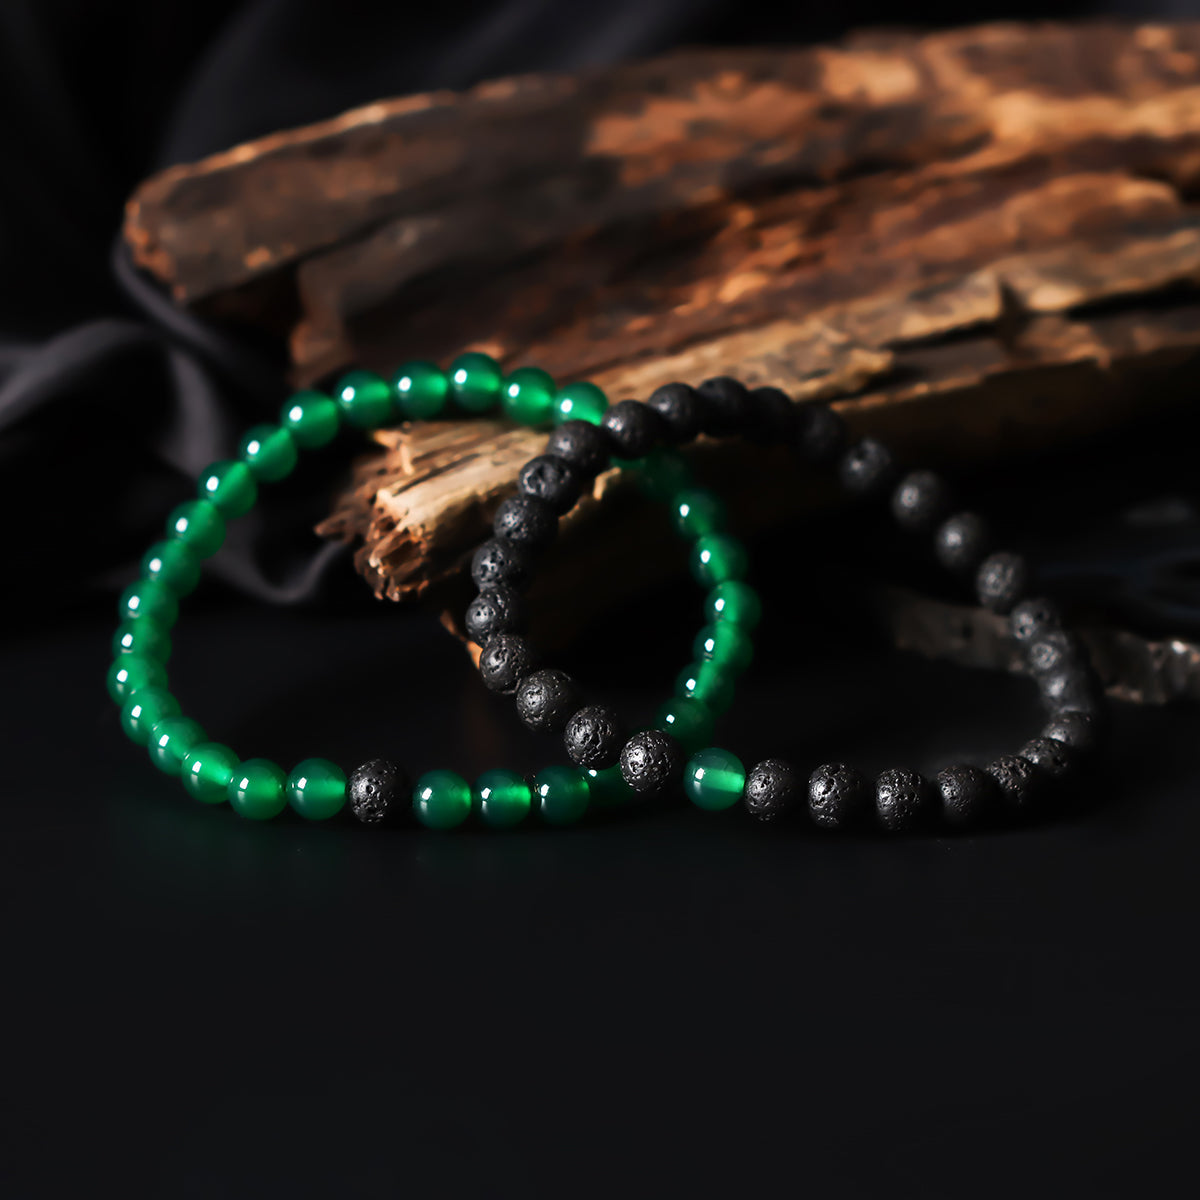 Artistic close-up of the Natural Green Onyx & Lava Gemstone Bracelet. A captivating shot capturing the soothing green hues of Onyx and the raw elegance of lava gemstones, creating a unique and eye-catching composition.